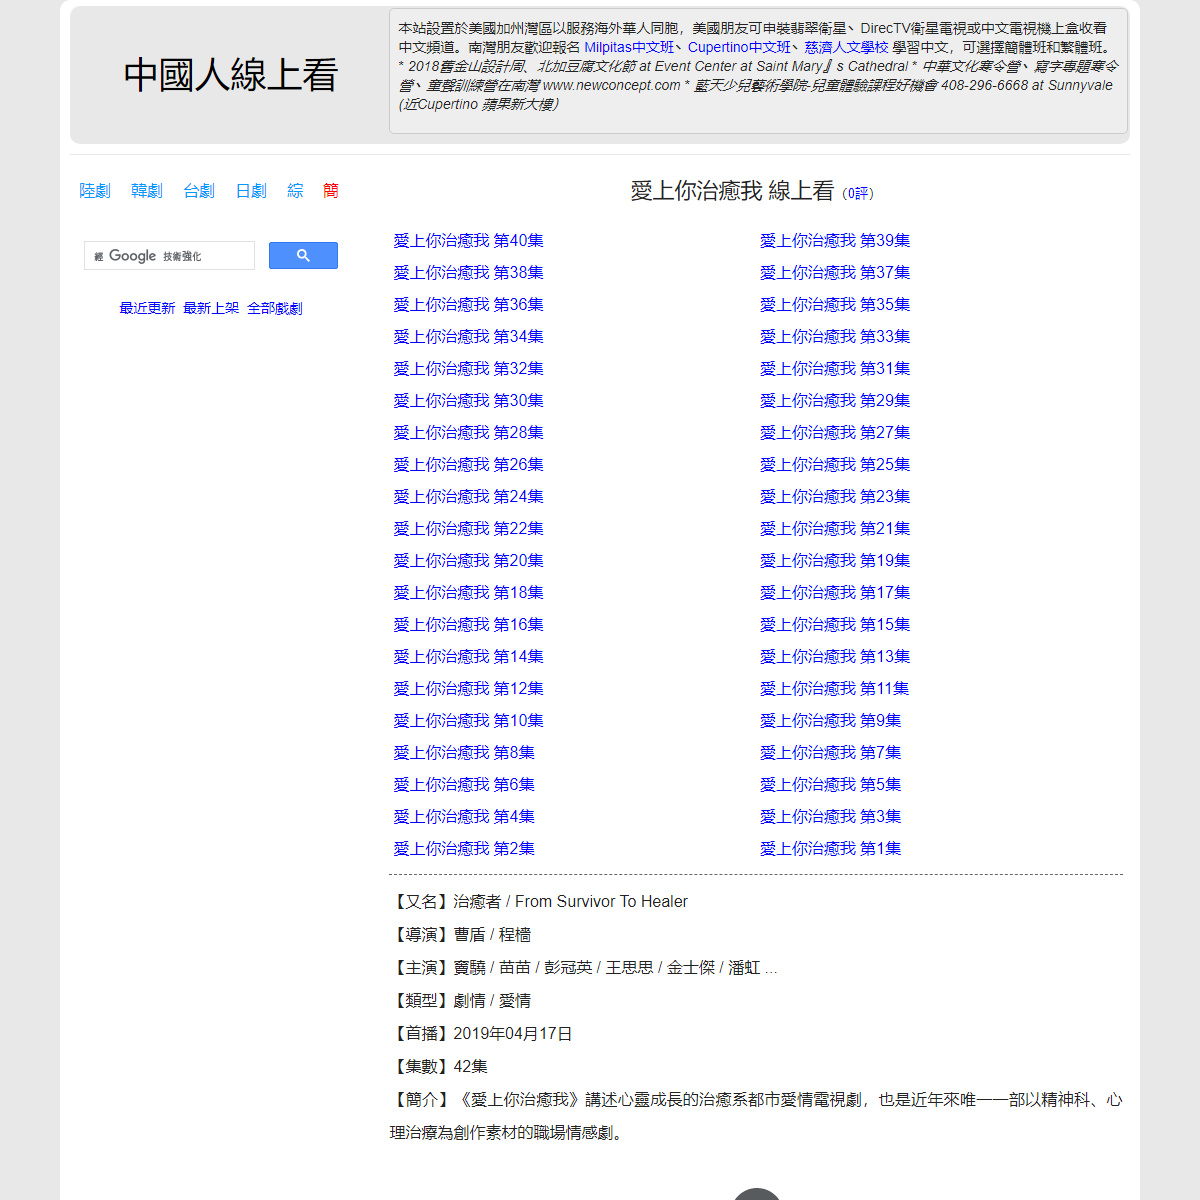 A complete backup of https://chinaq.tv/cn190417/